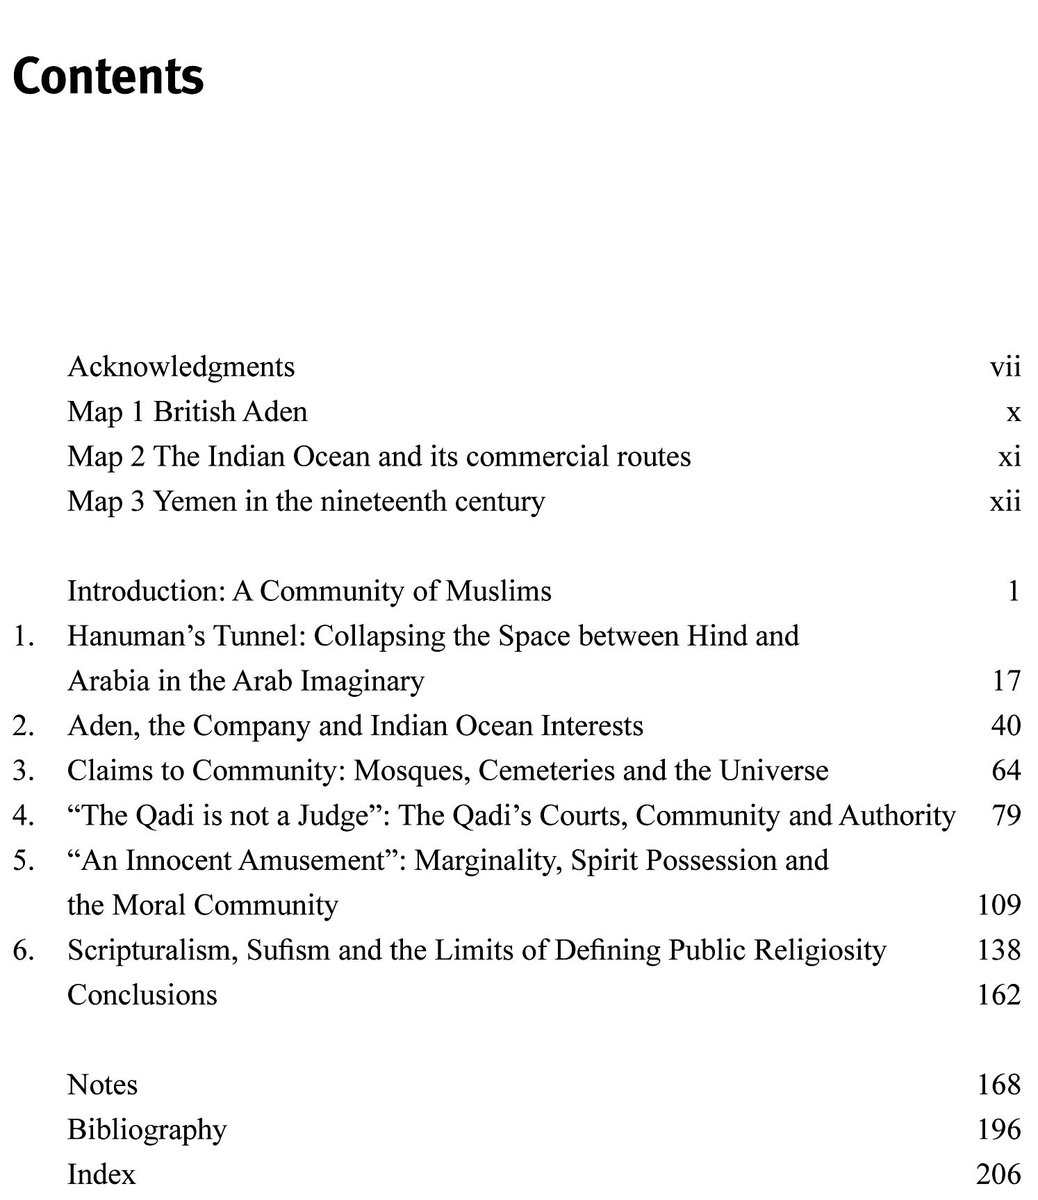 #OpenAccess
#IndianOcean #Arabia #Britain #Aden #Sufism #Endowments #Colonialism #Trade #India
#EastIndiaCompany #MuhammadAli #Ottoman
Imperial Muslims
Islam, Community and Authority in the Indian Ocean 1839-1937
Scott S. Reese
Edinburgh Univ Pr 2018
PDF🎯
library.oapen.org/viewer/web/vie…